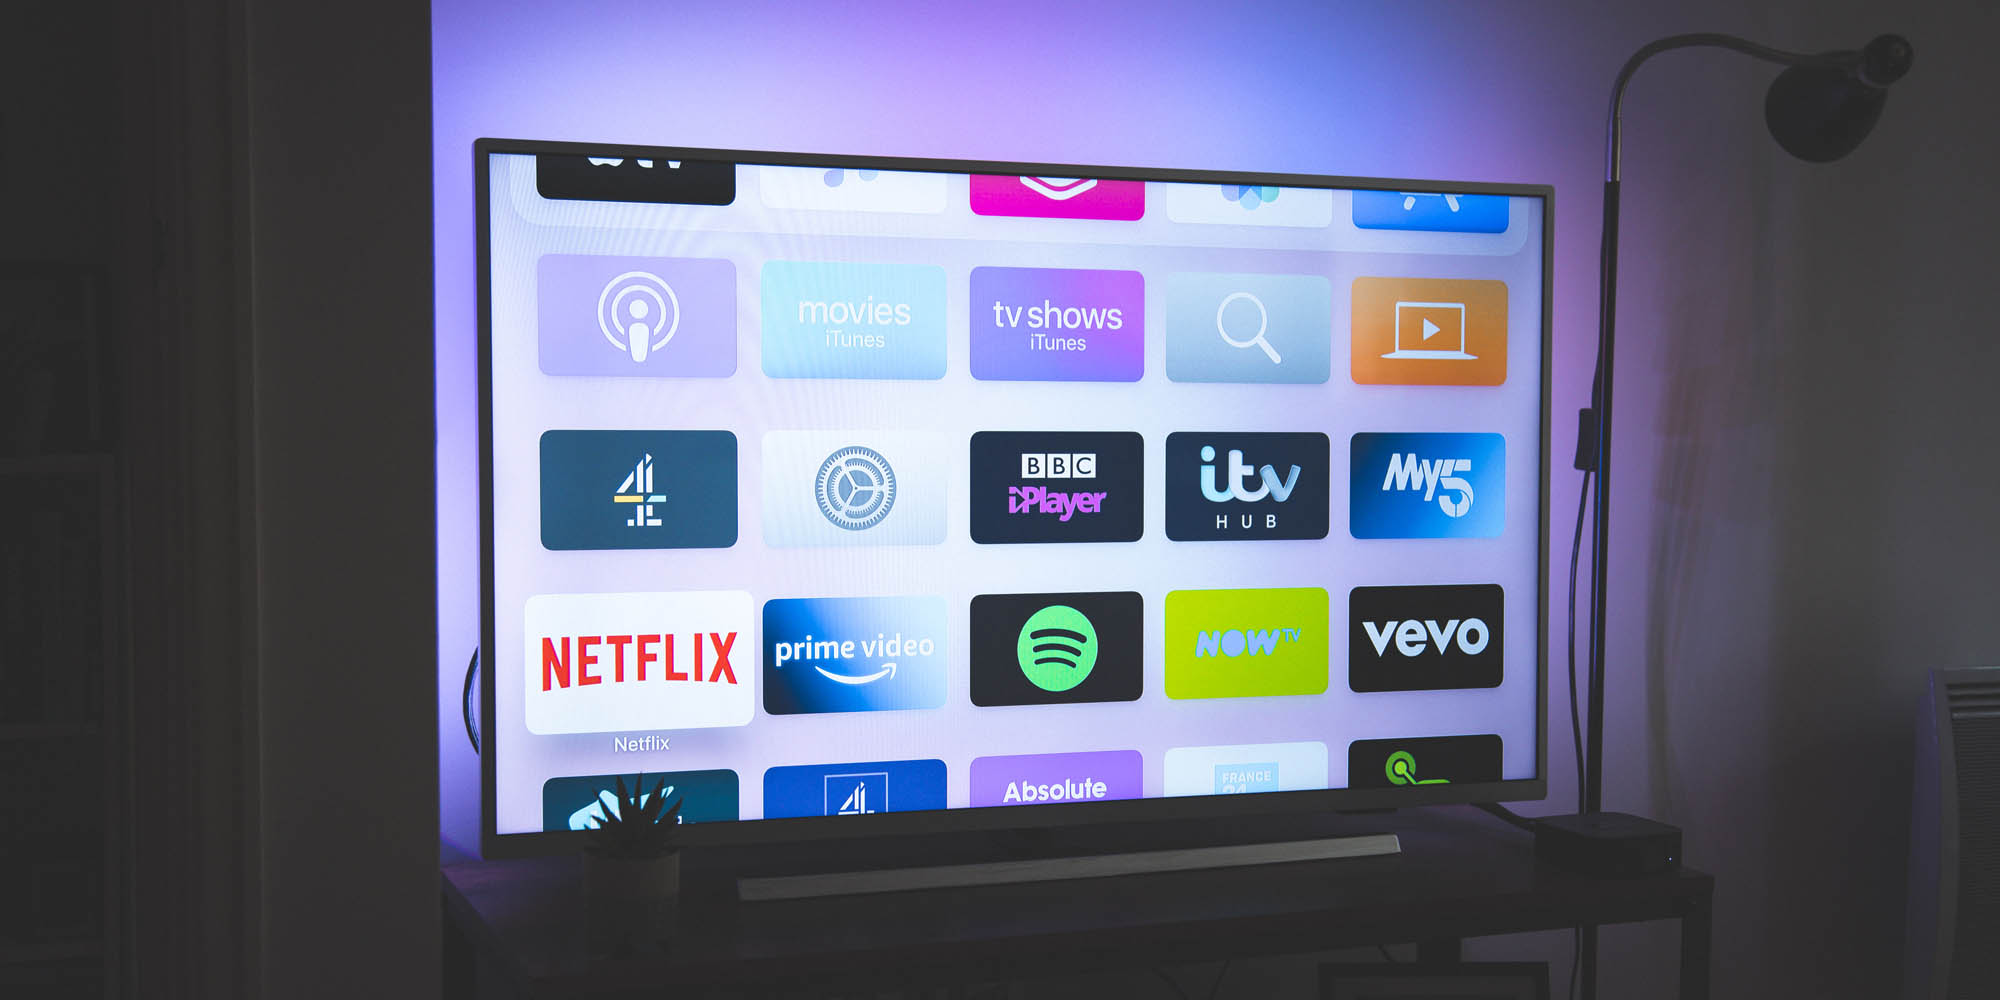 2022: the year of connected TV